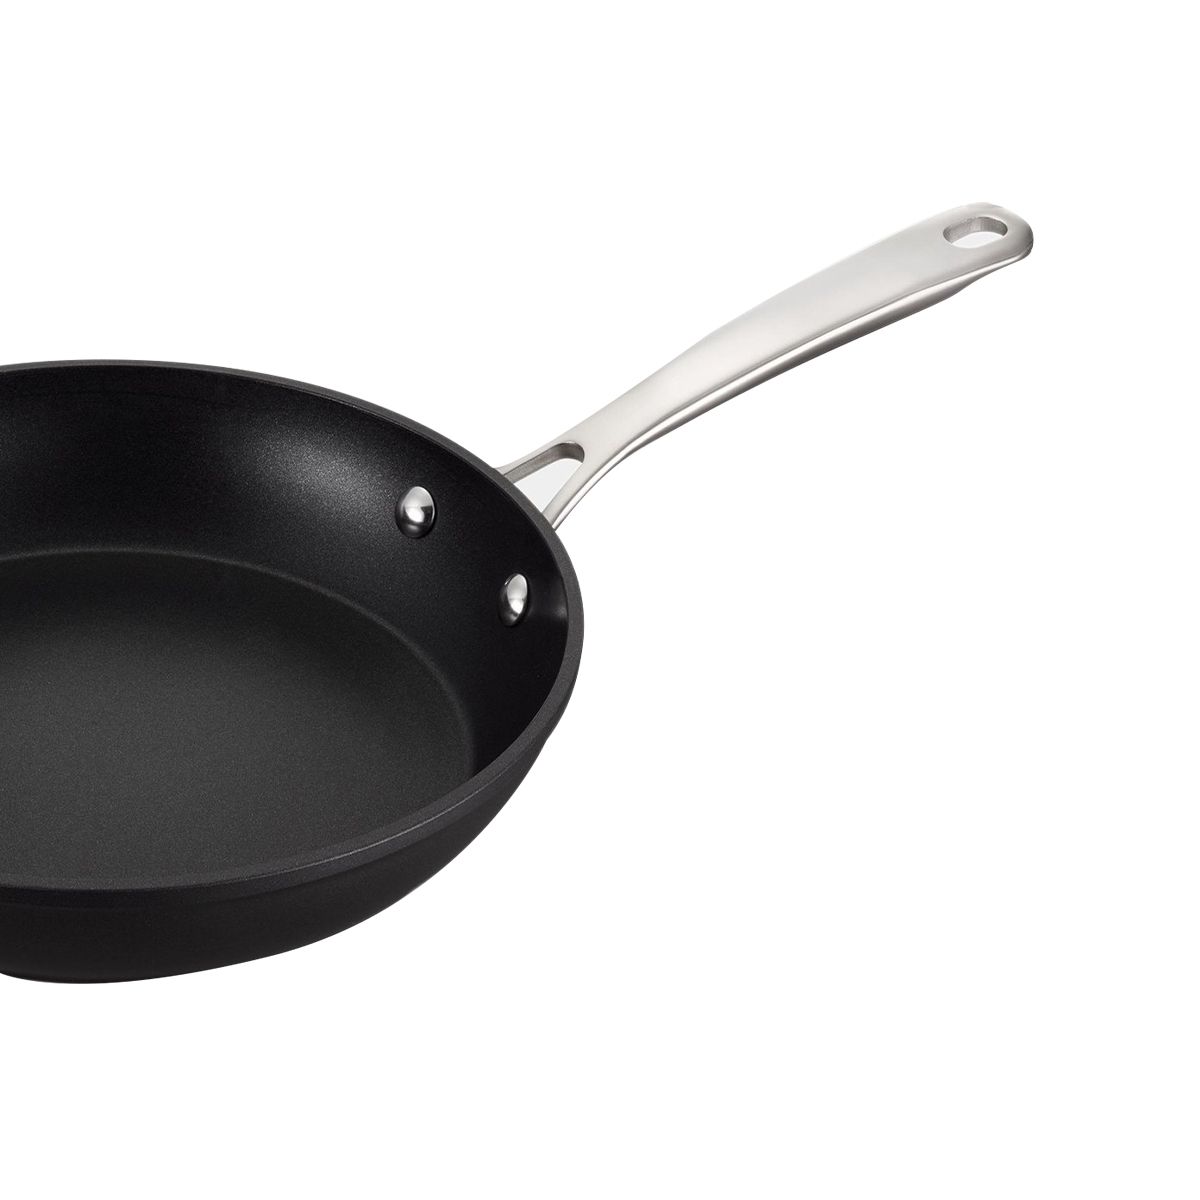 Brabantia Chrome Non-stick Frying Pan 24 CM - SuperStore.ge – Online shop  of Super chain stores